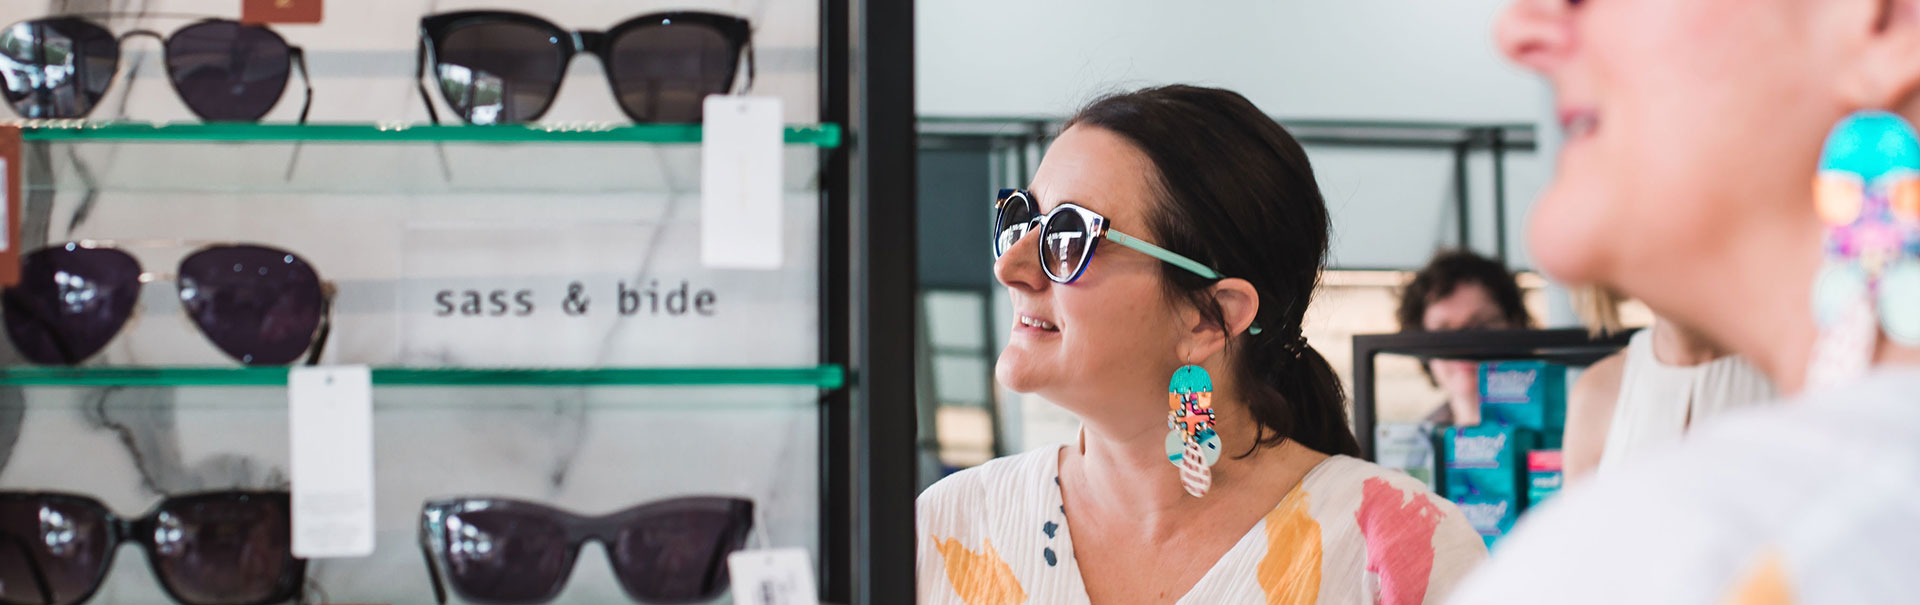 Brunette woman with colourful earrings trying on a pair of sunglasses